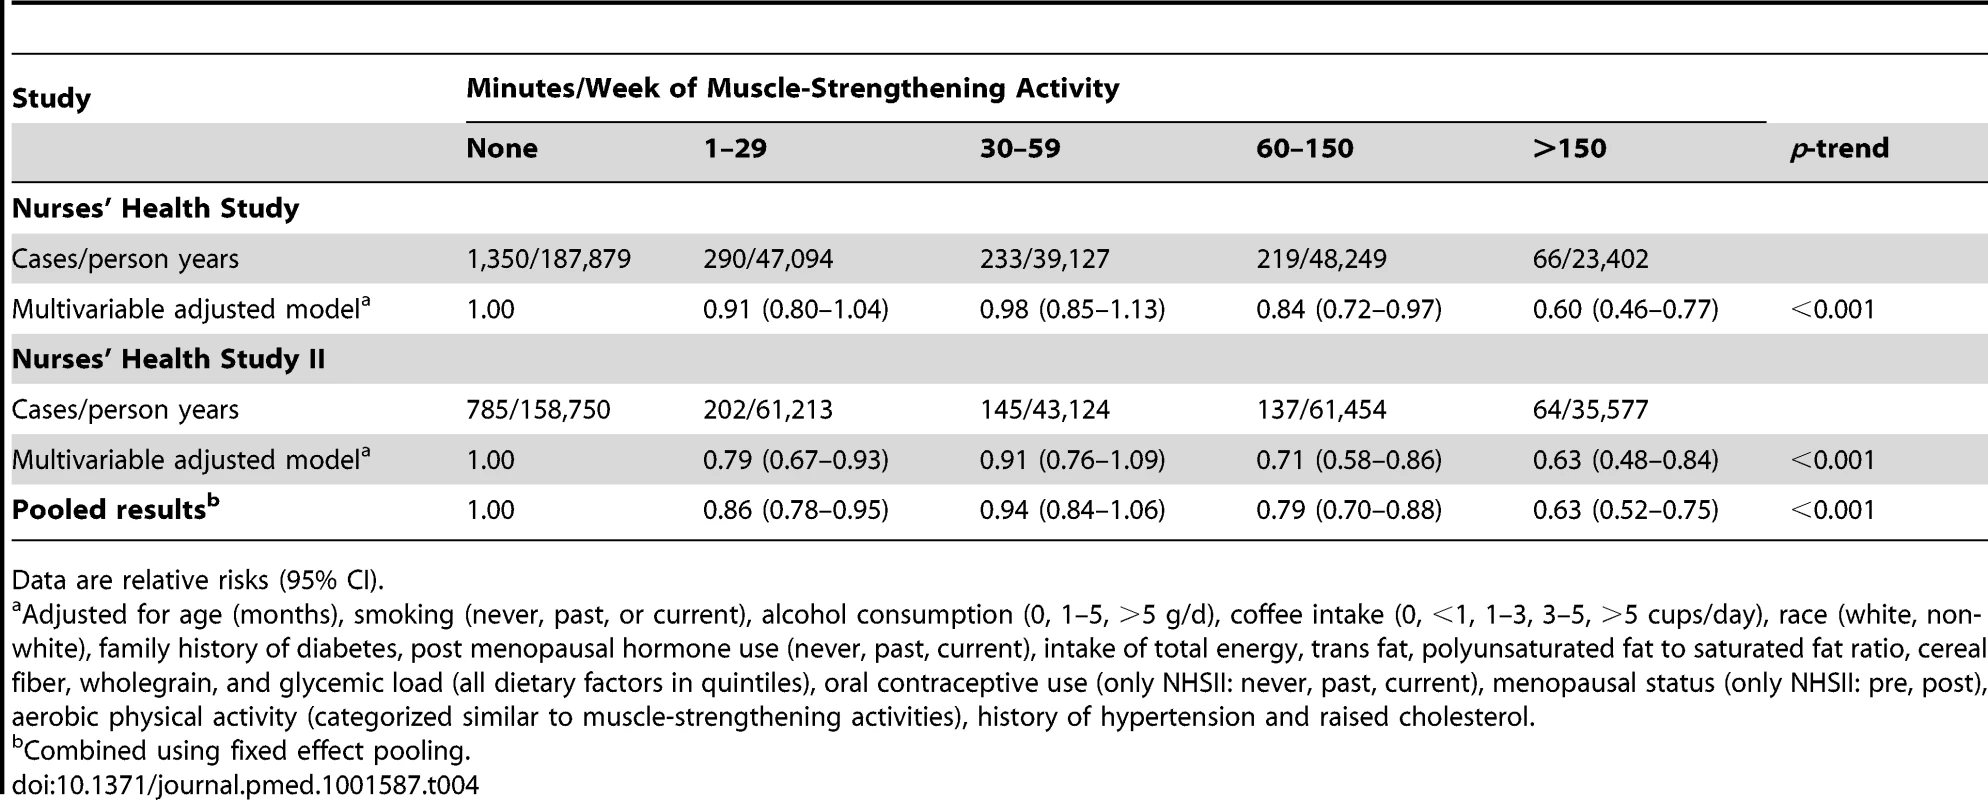 Total muscle-strengthening and conditioning activities and risk of type 2 diabetes in women from the Nurses' Health Study and Nurses' Health Study II with additional adjustment for history of hypertension and raised cholesterol.